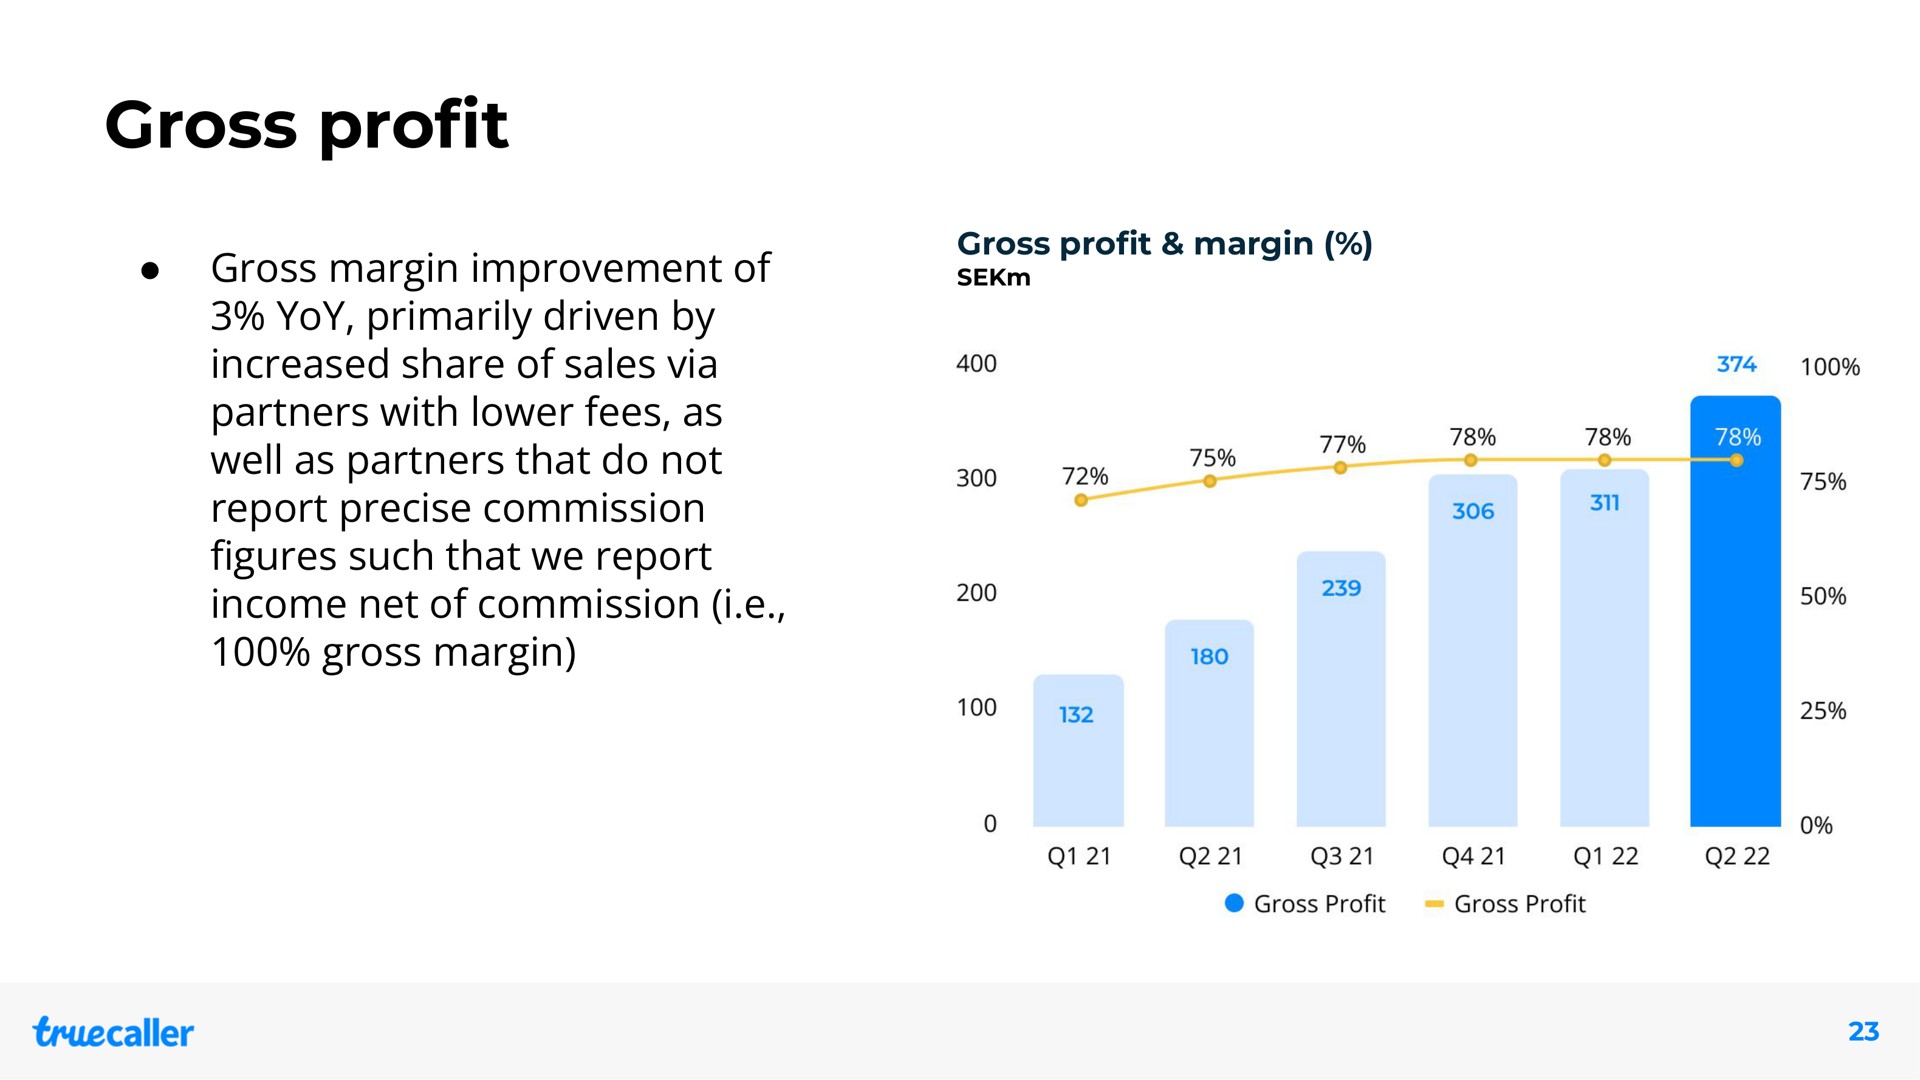 gross pro gross margin improvement of yoy primarily driven by increased share of sales via partners with lower fees as well as partners that do not report precise commission such that we report income net of commission i gross margin profit figures | Truecaller